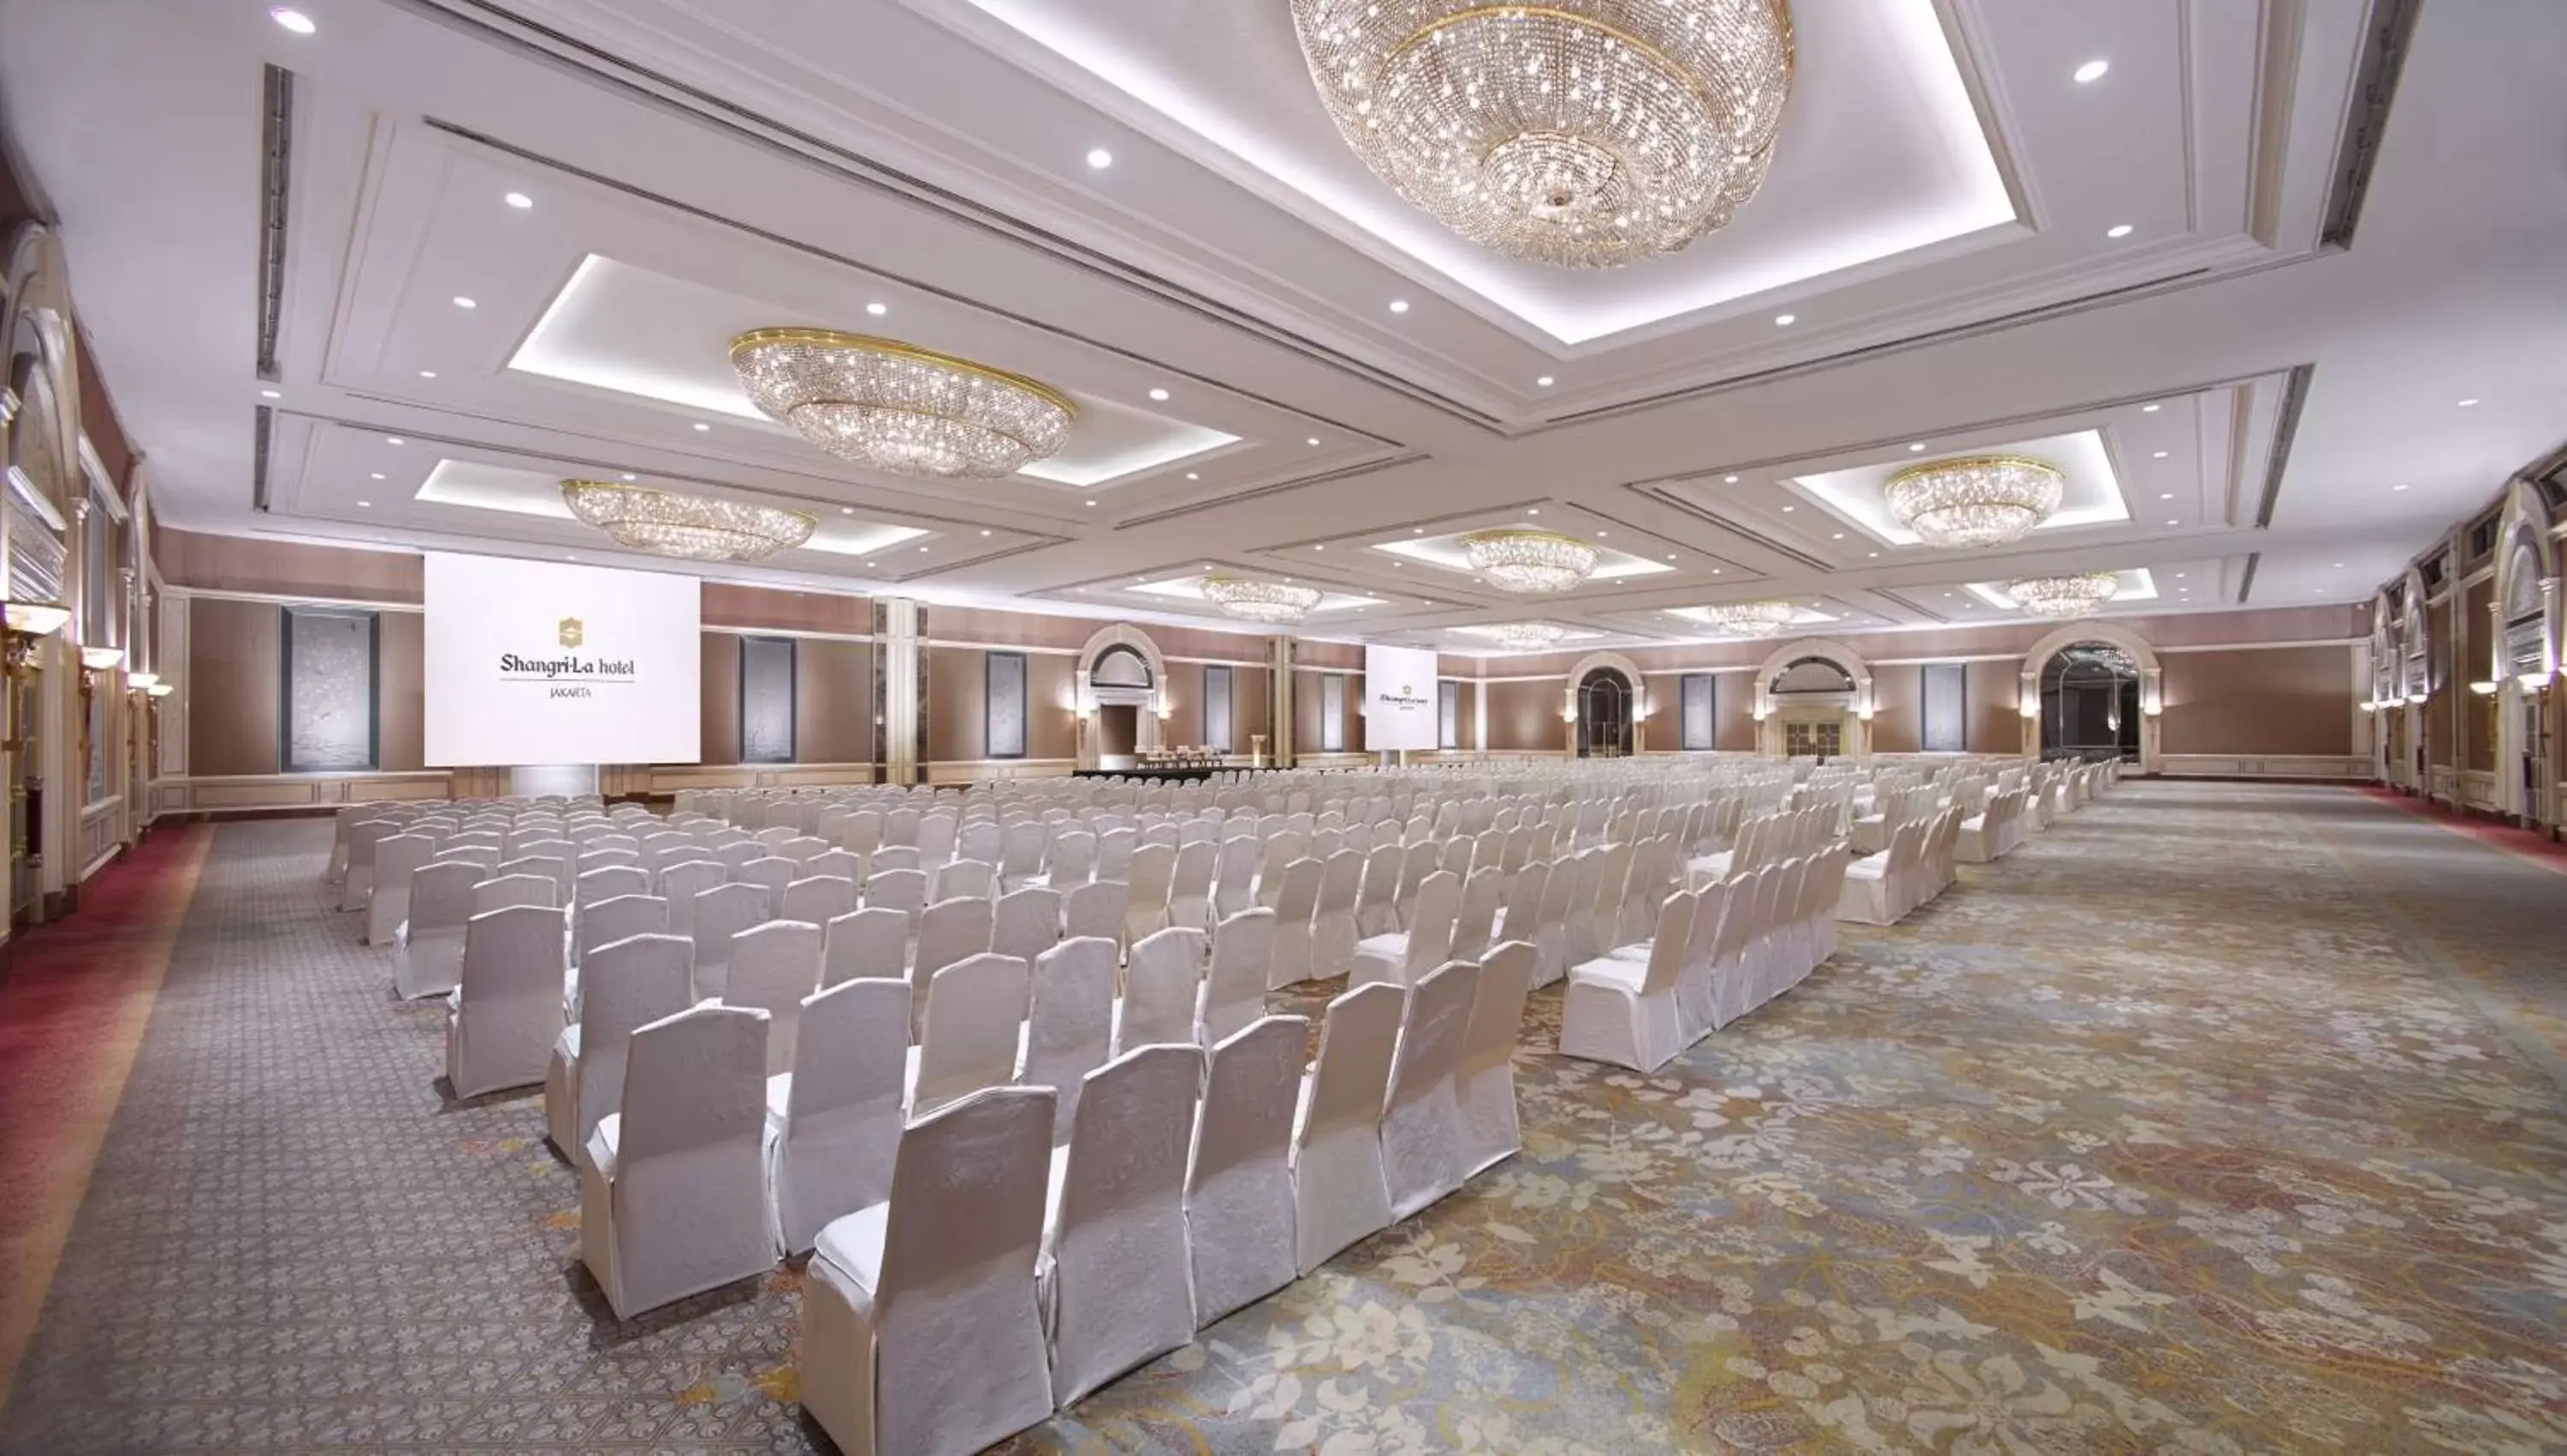 On site, Business Area/Conference Room in Shangri-La Jakarta